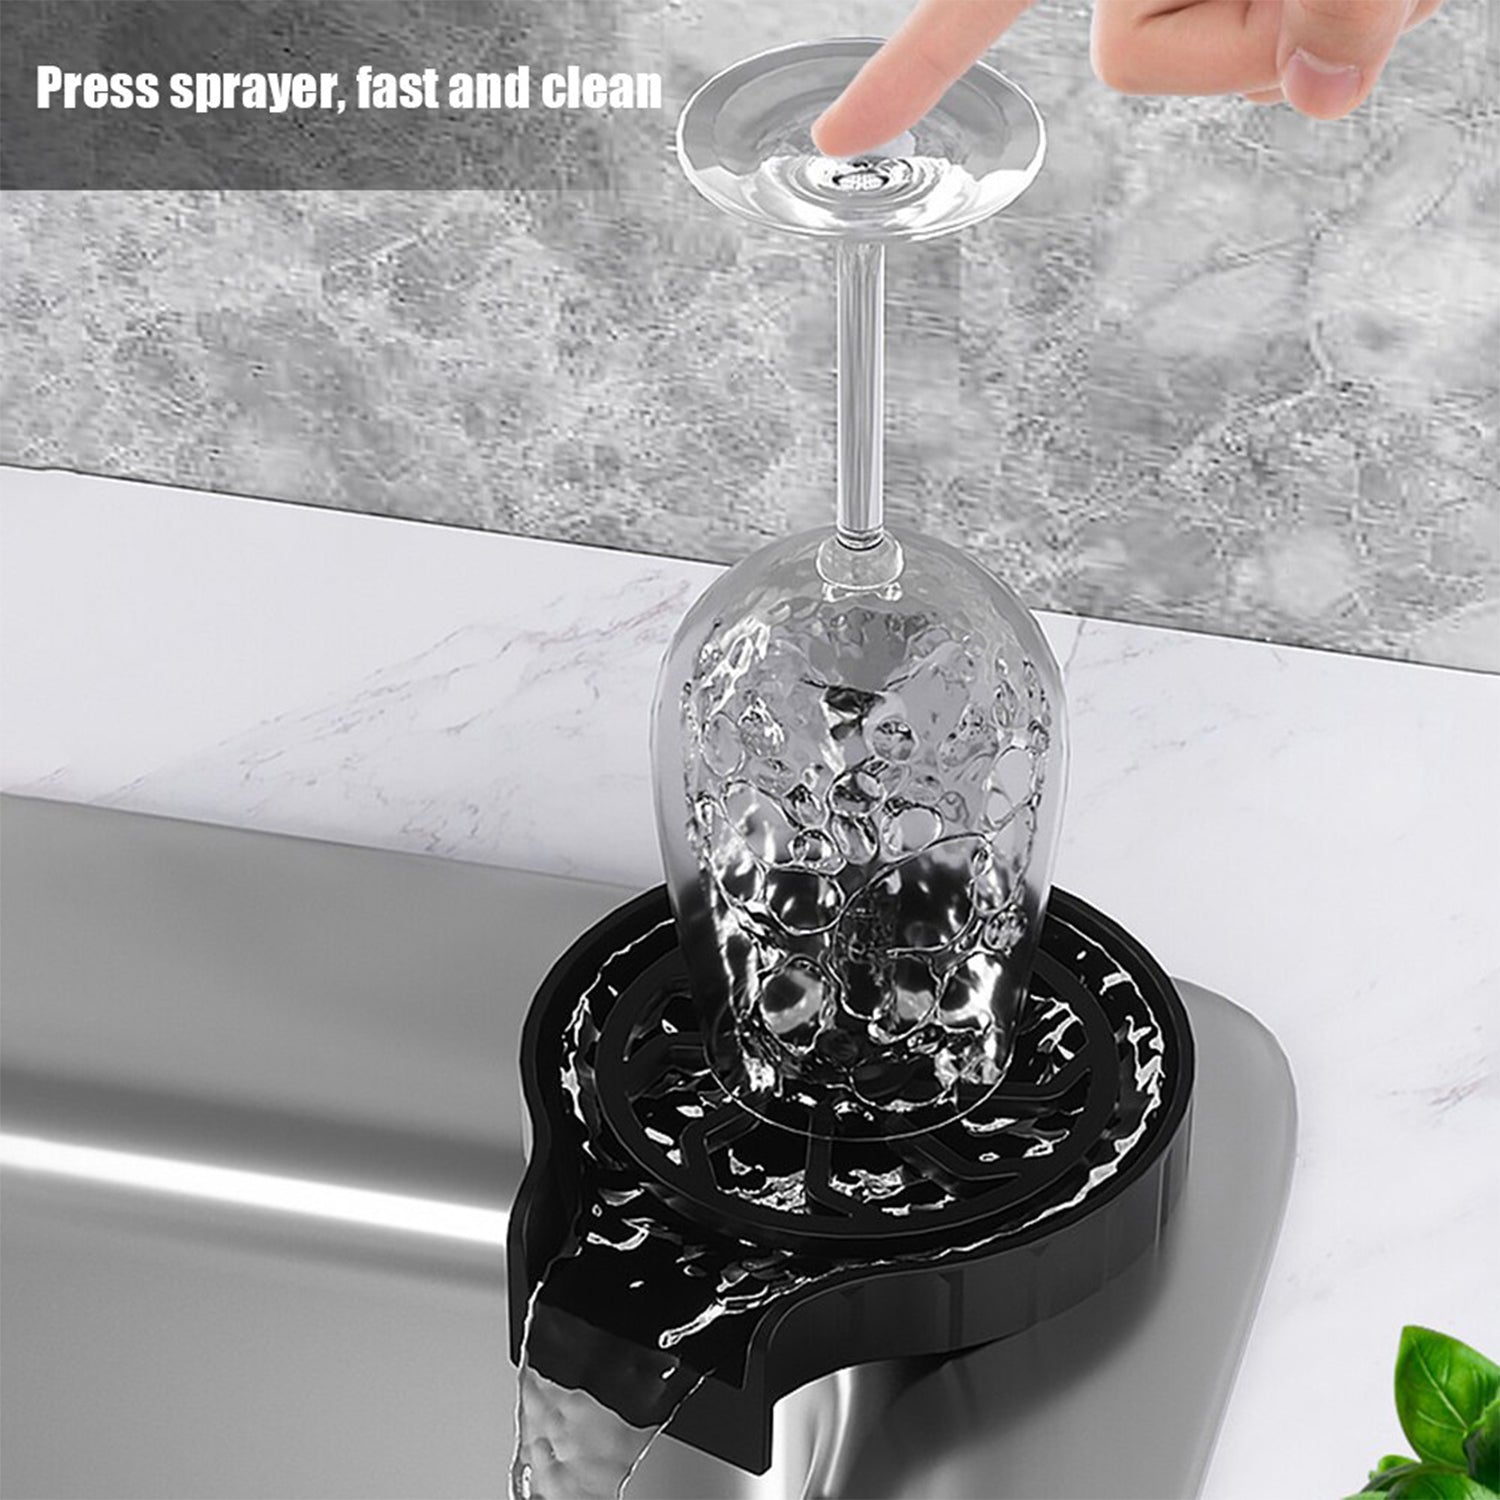 2232L Automatic Cup Washer or Glass Rinser for Kitchen Sink, Black Kitchen Sink Cleaning Spray Cup Washer, Bar Glass Washer. (loose)